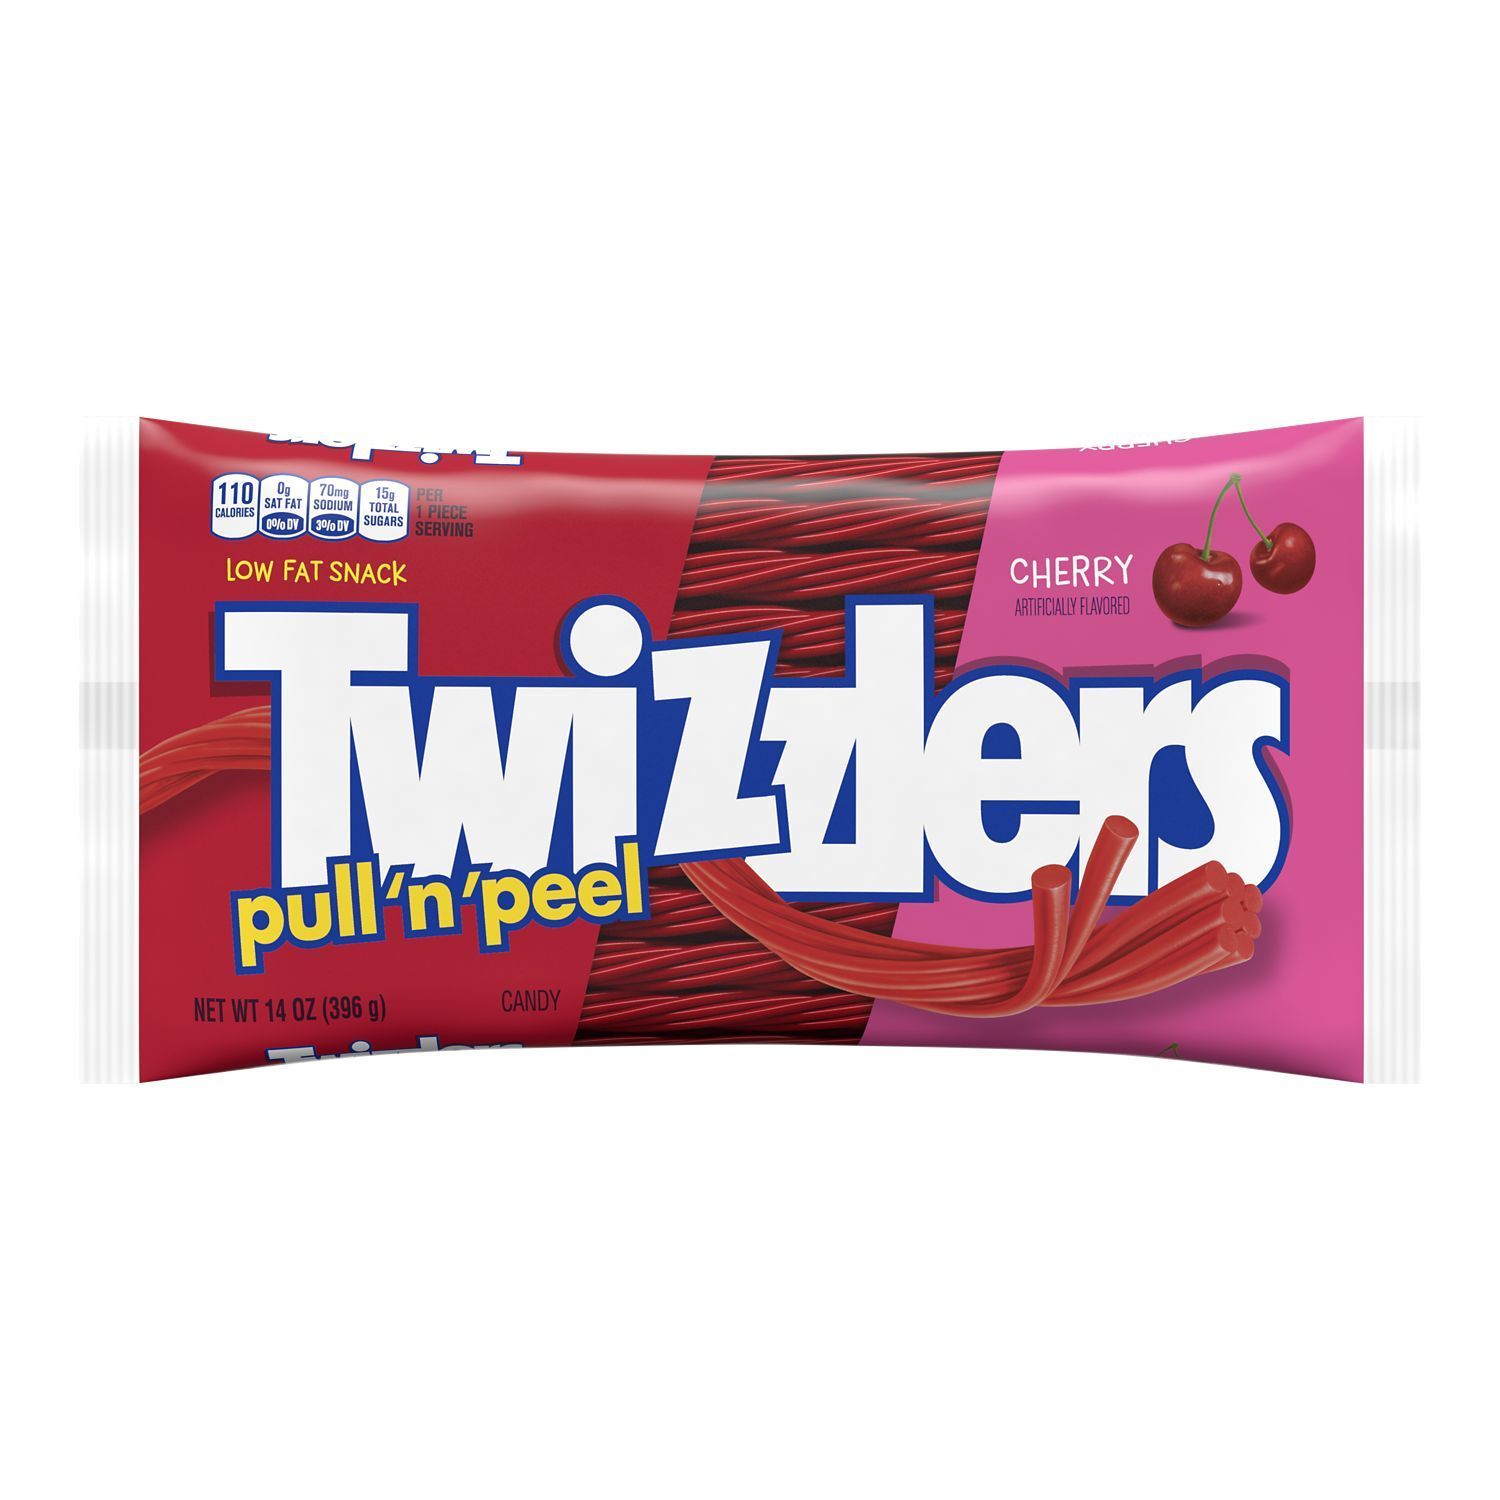 TWIZZLERS, PULL 'N' PEEL Cherry Flavored Chewy Candy, Low Fat, 14 oz, Bag | Walmart (US)